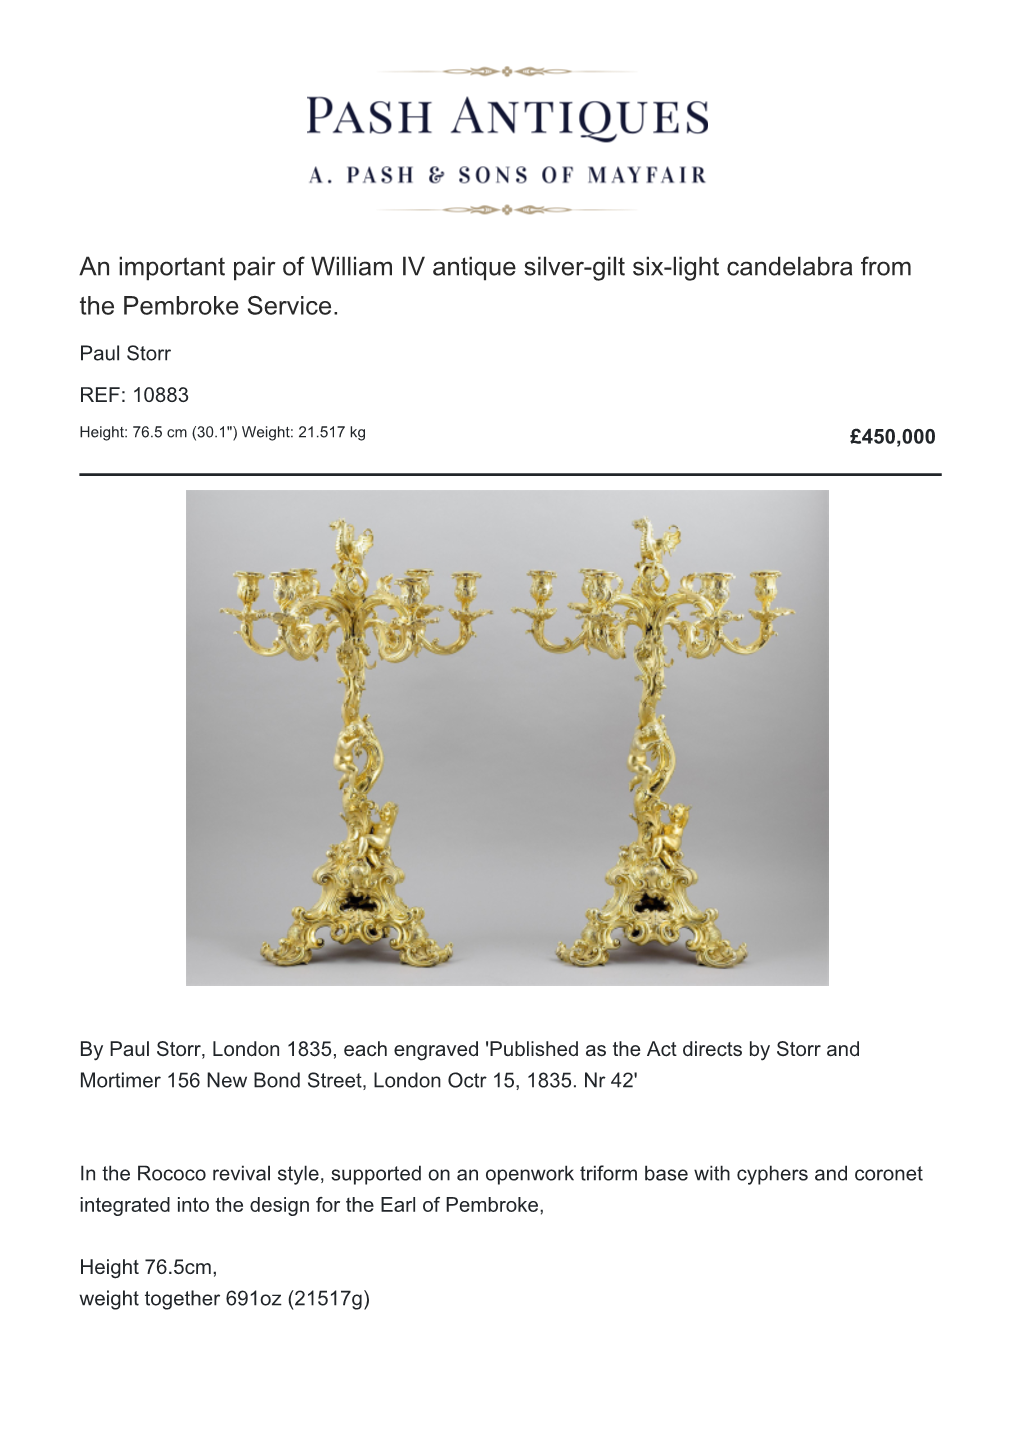 An Important Pair of William IV Antique Silver-Gilt Six-Light Candelabra from the Pembroke Service